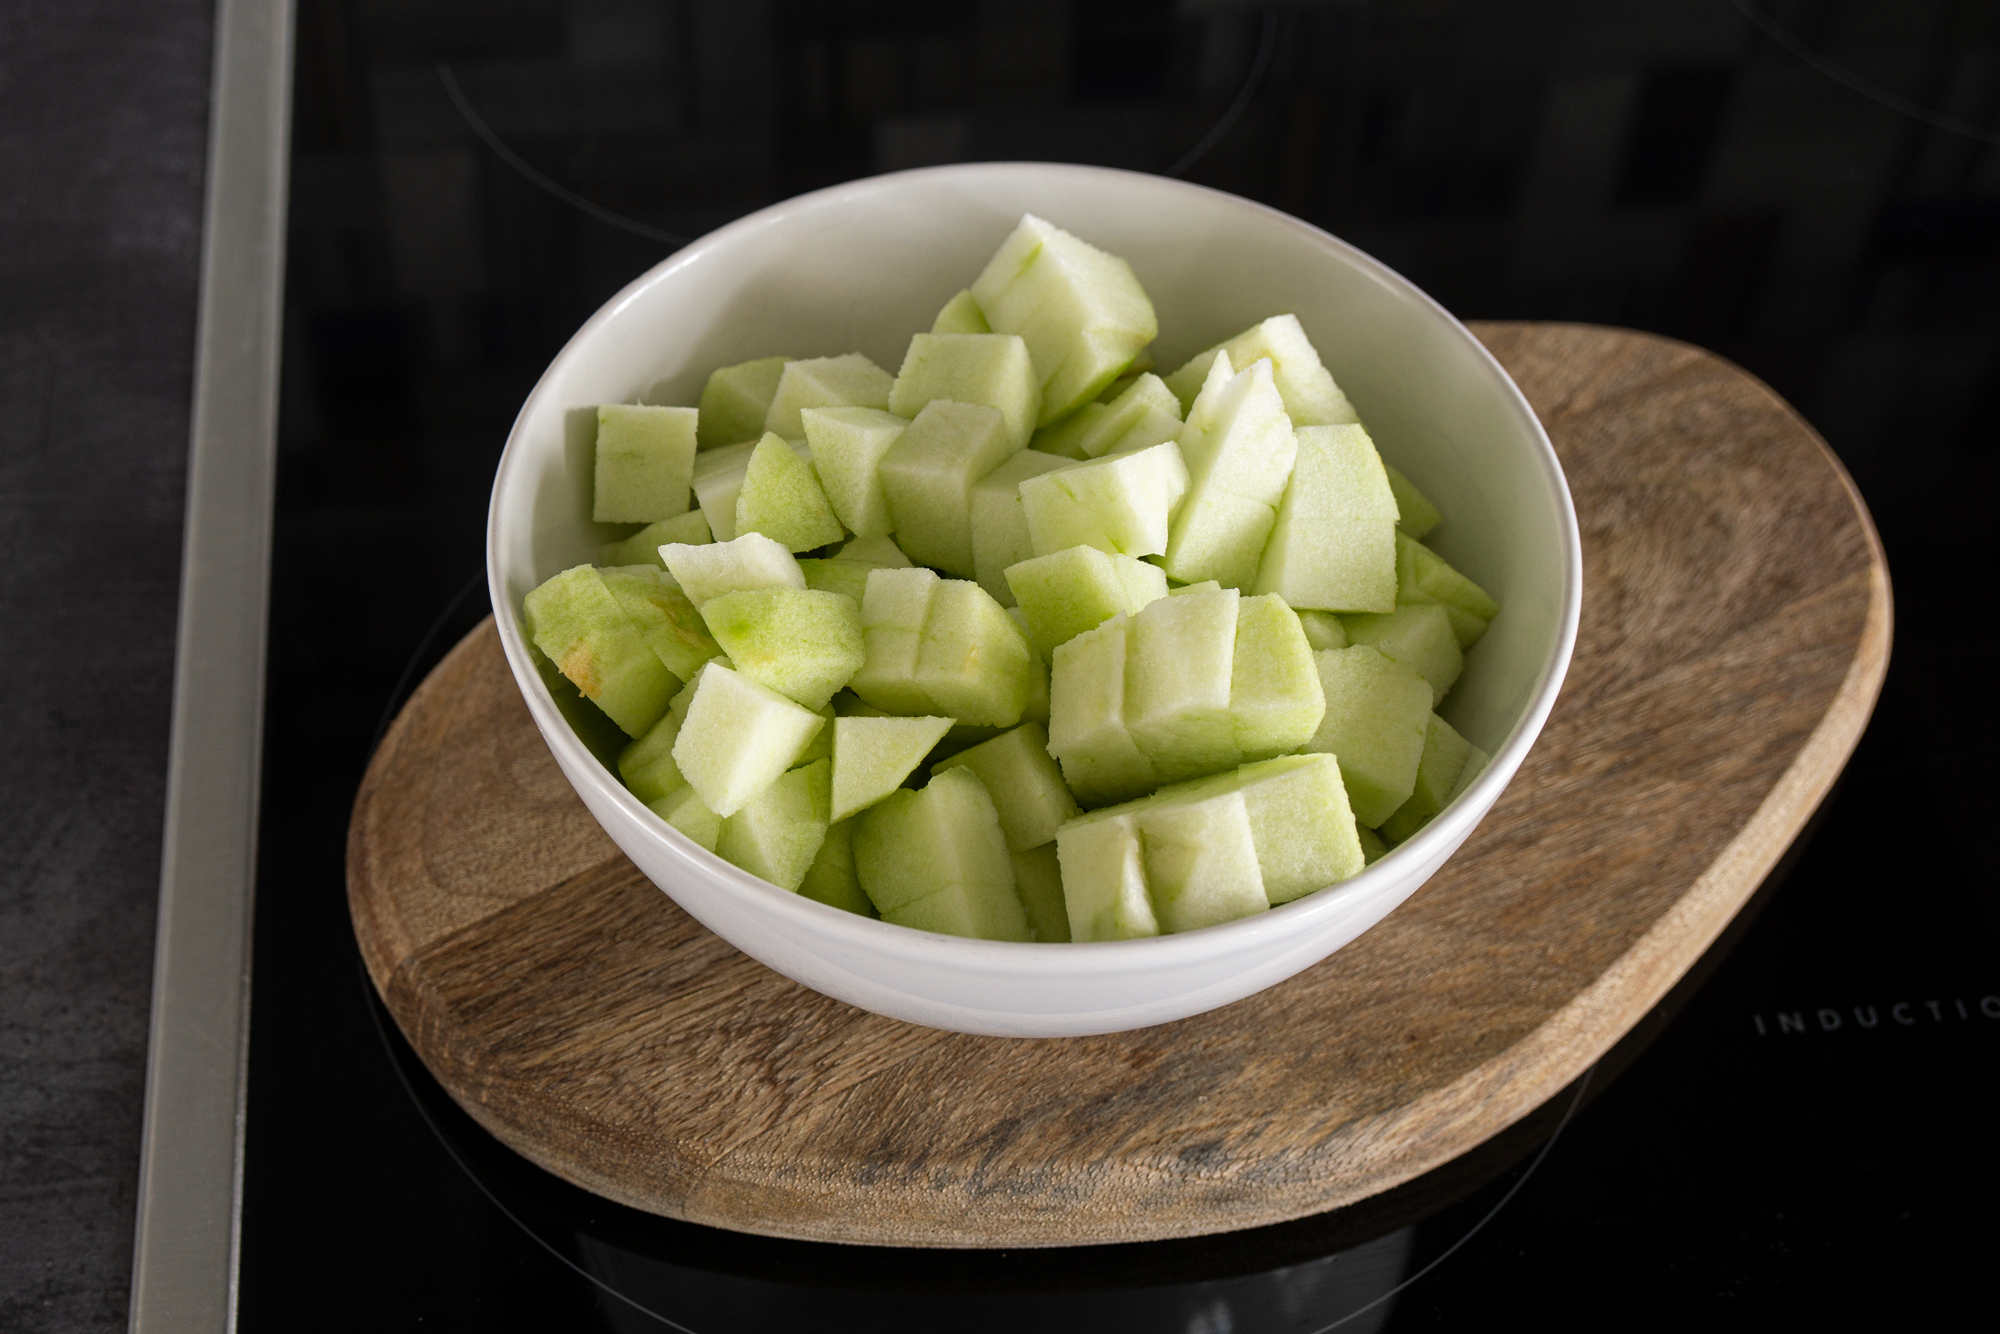 Apples diced into cubes